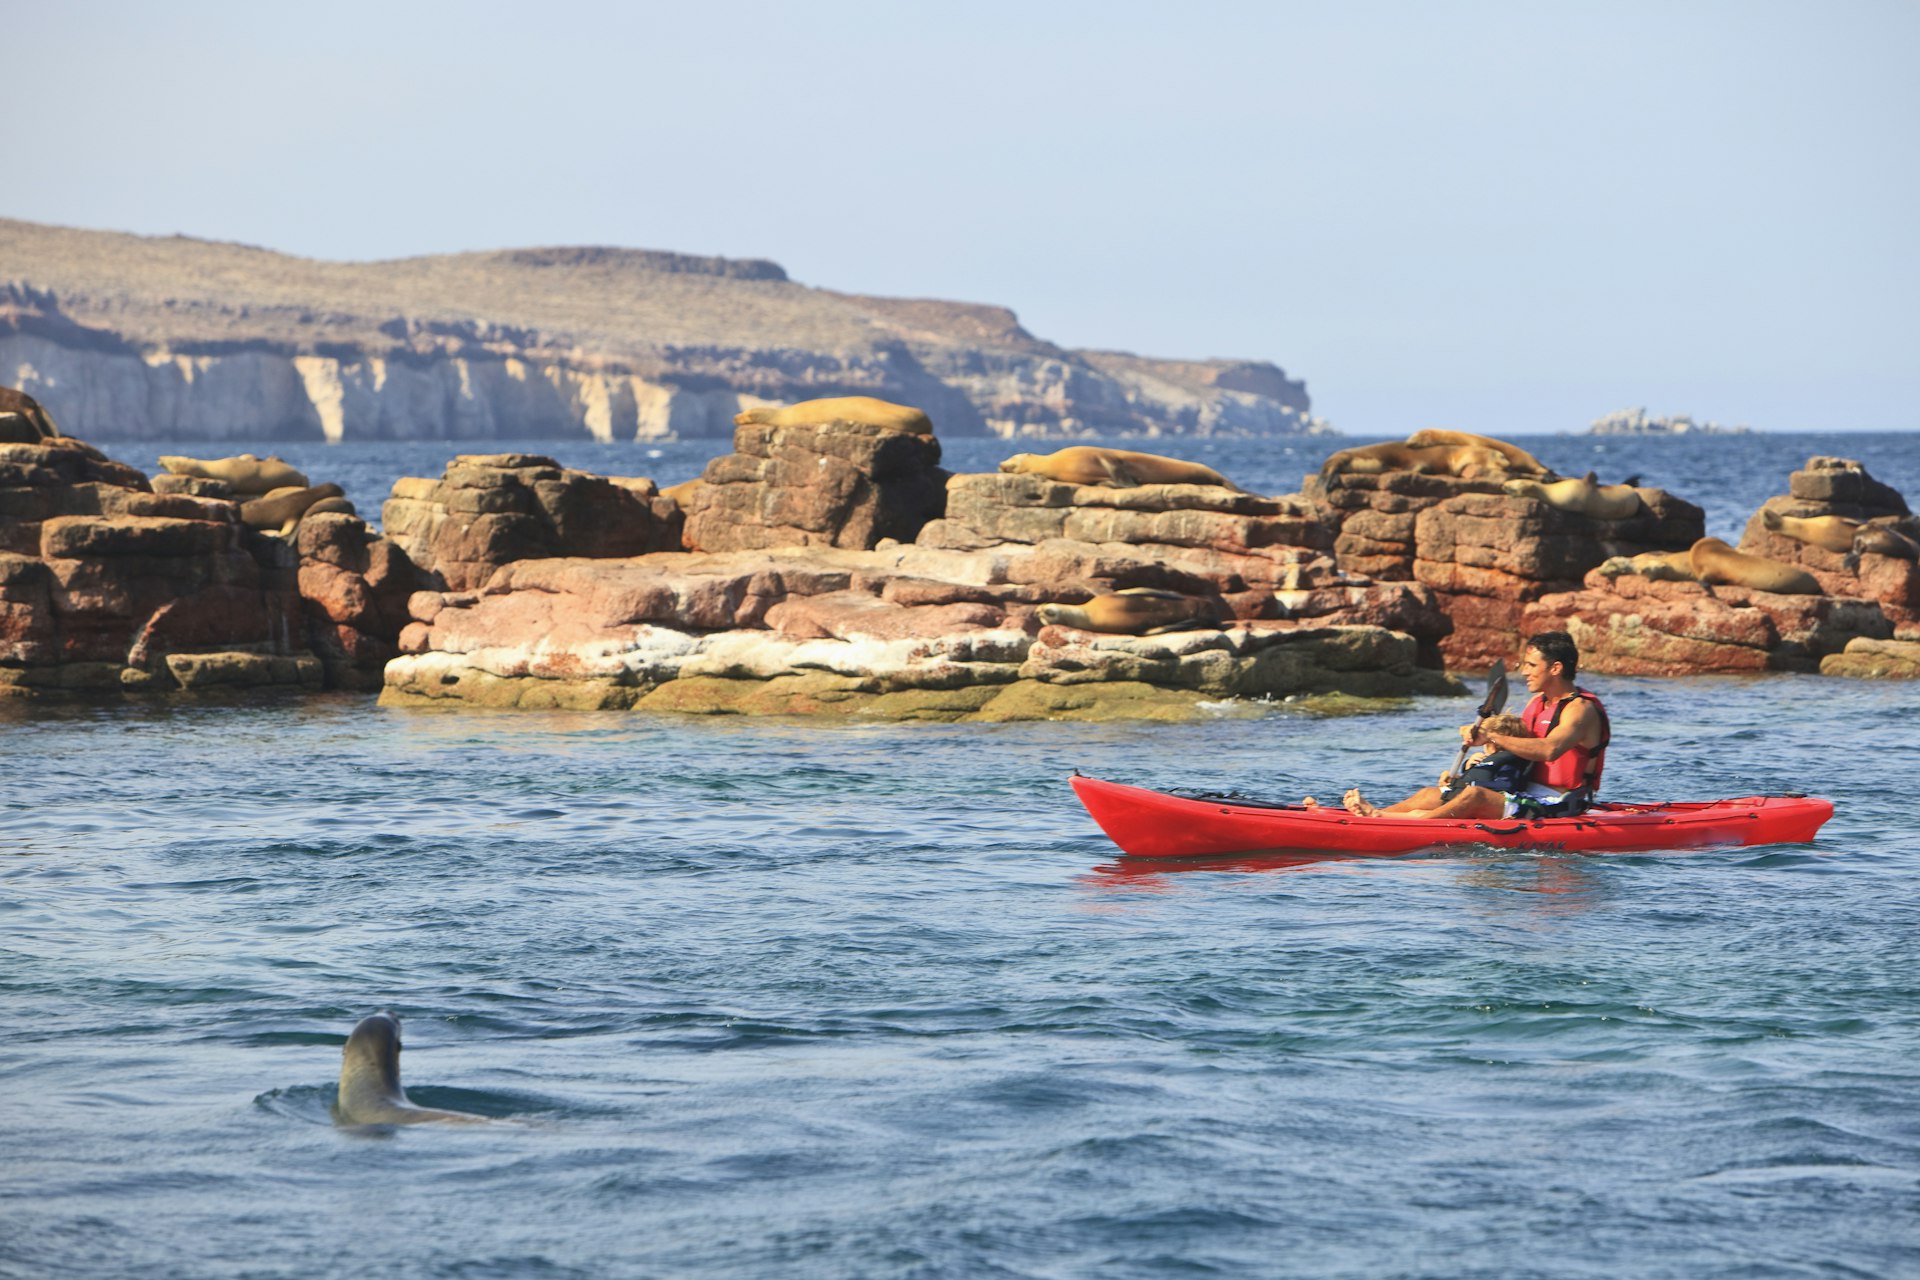 A man with a child on his lap kayaks in the Sea of Cortez as a curious sea lion peeks above the surface of the water